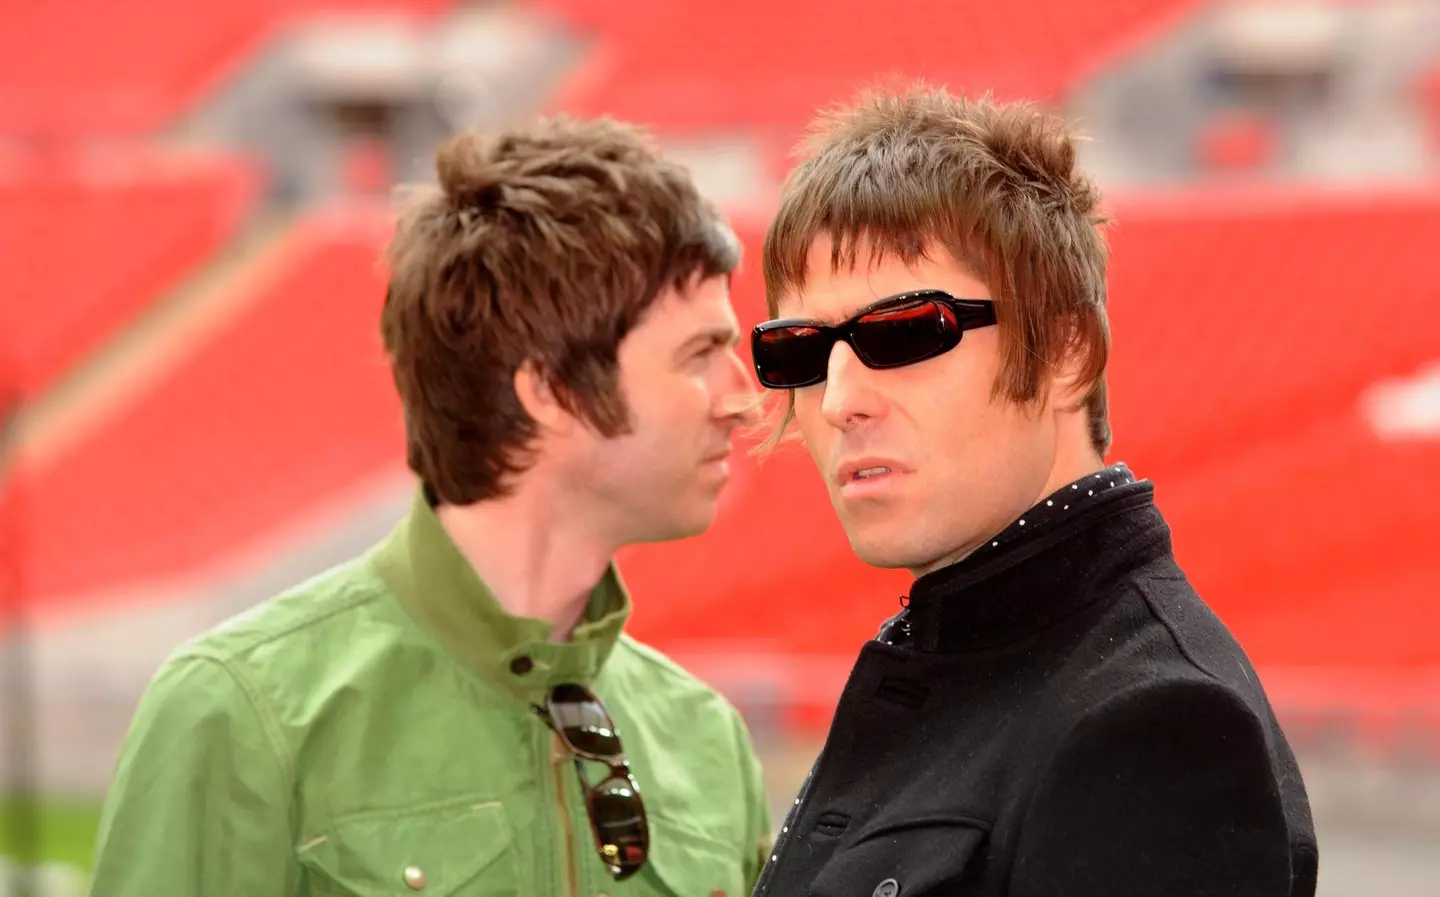 Liam Gallagher has taken to Instagram to condemn his brother's comments about people with disabilities.